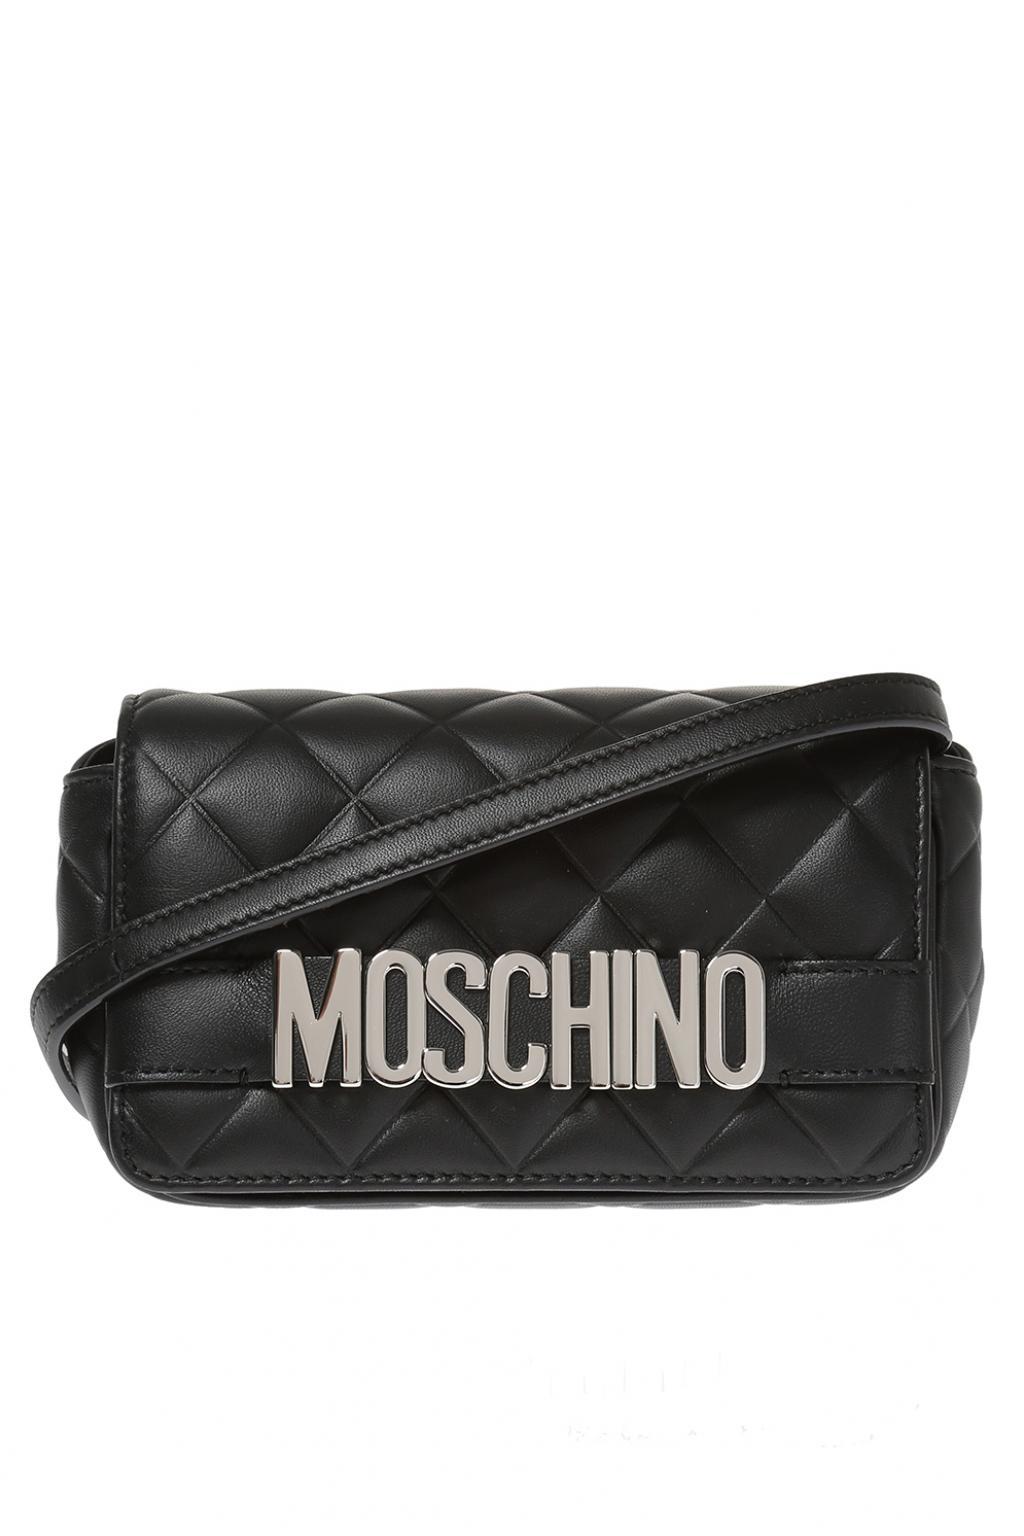 Moschino Leather Quilted Shoulder Bag in Red Black (Black) - Lyst